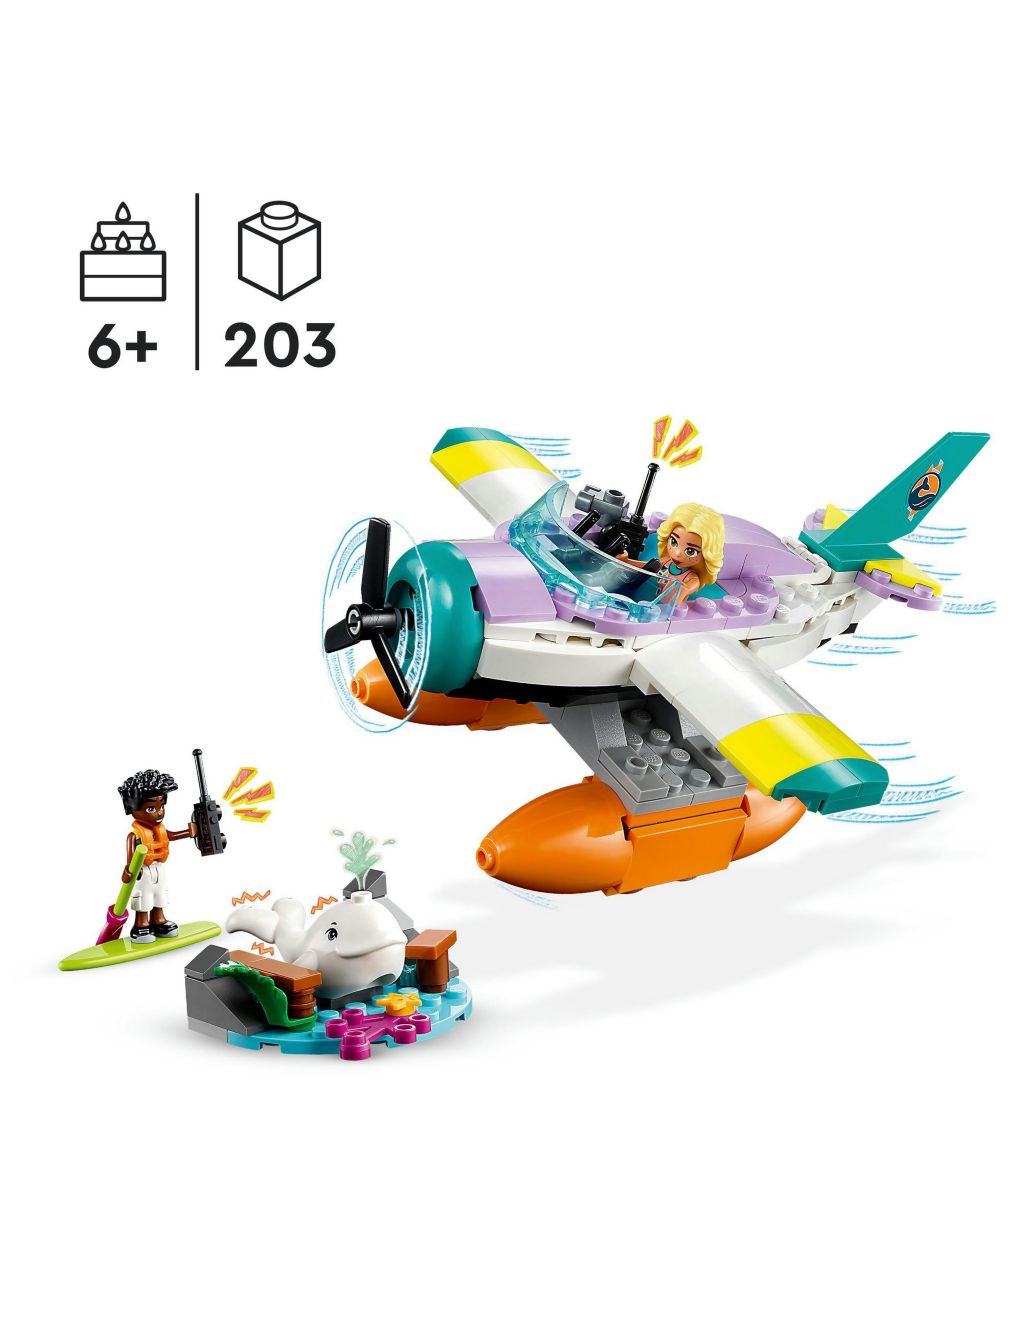 LEGO Friends Sea Rescue Plane Toy Playset (6+ Yrs) image 2